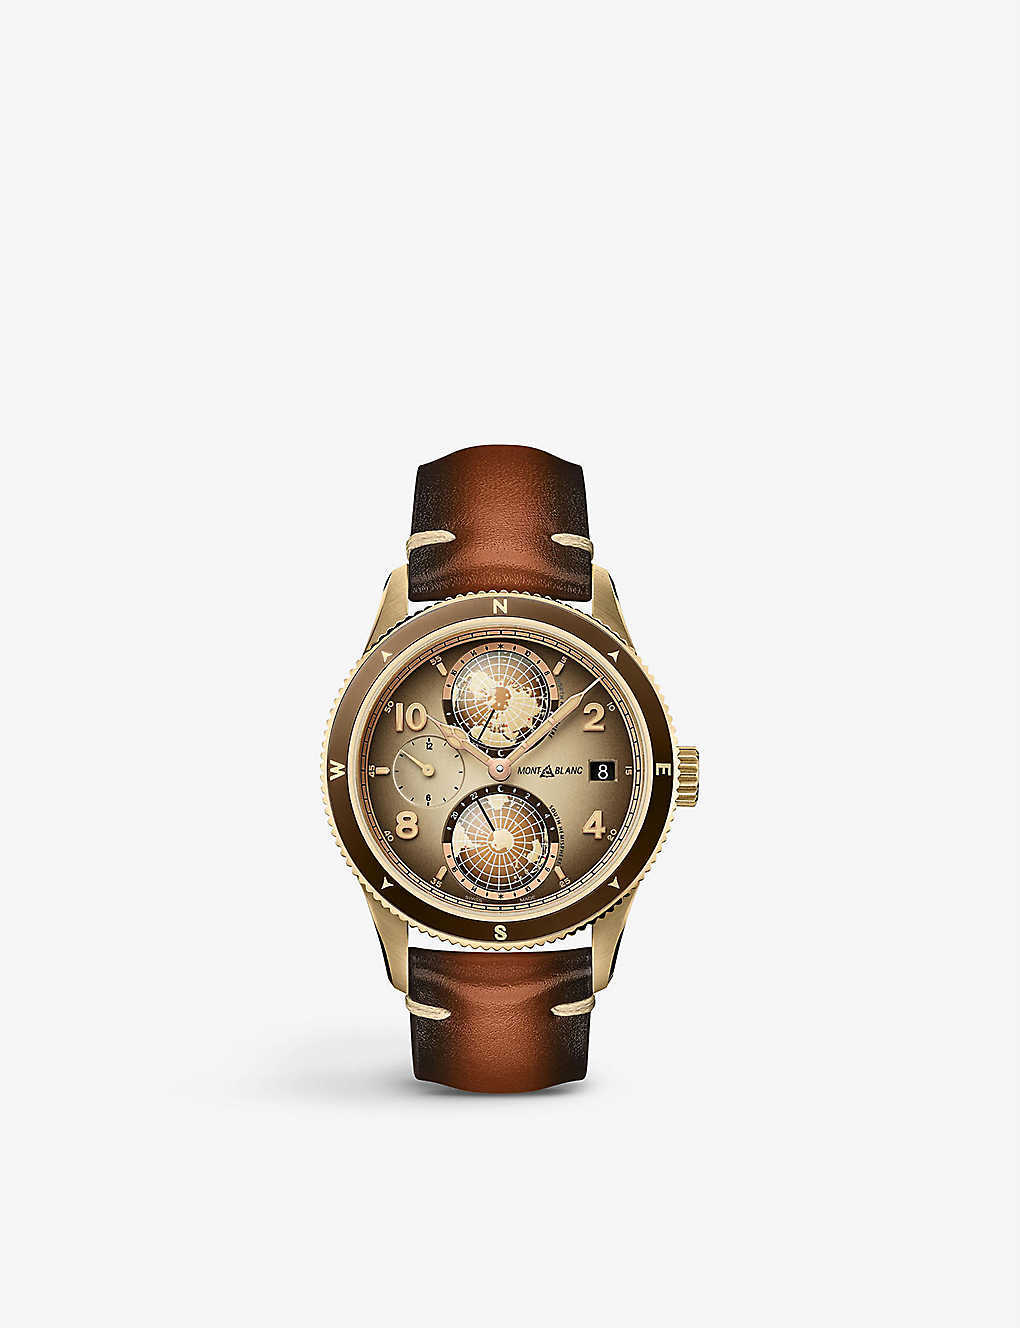 Montblanc 1858 Geosphere Limited Edition Automatic 42mm Bronze And Leather Watch, Ref. No. 128504